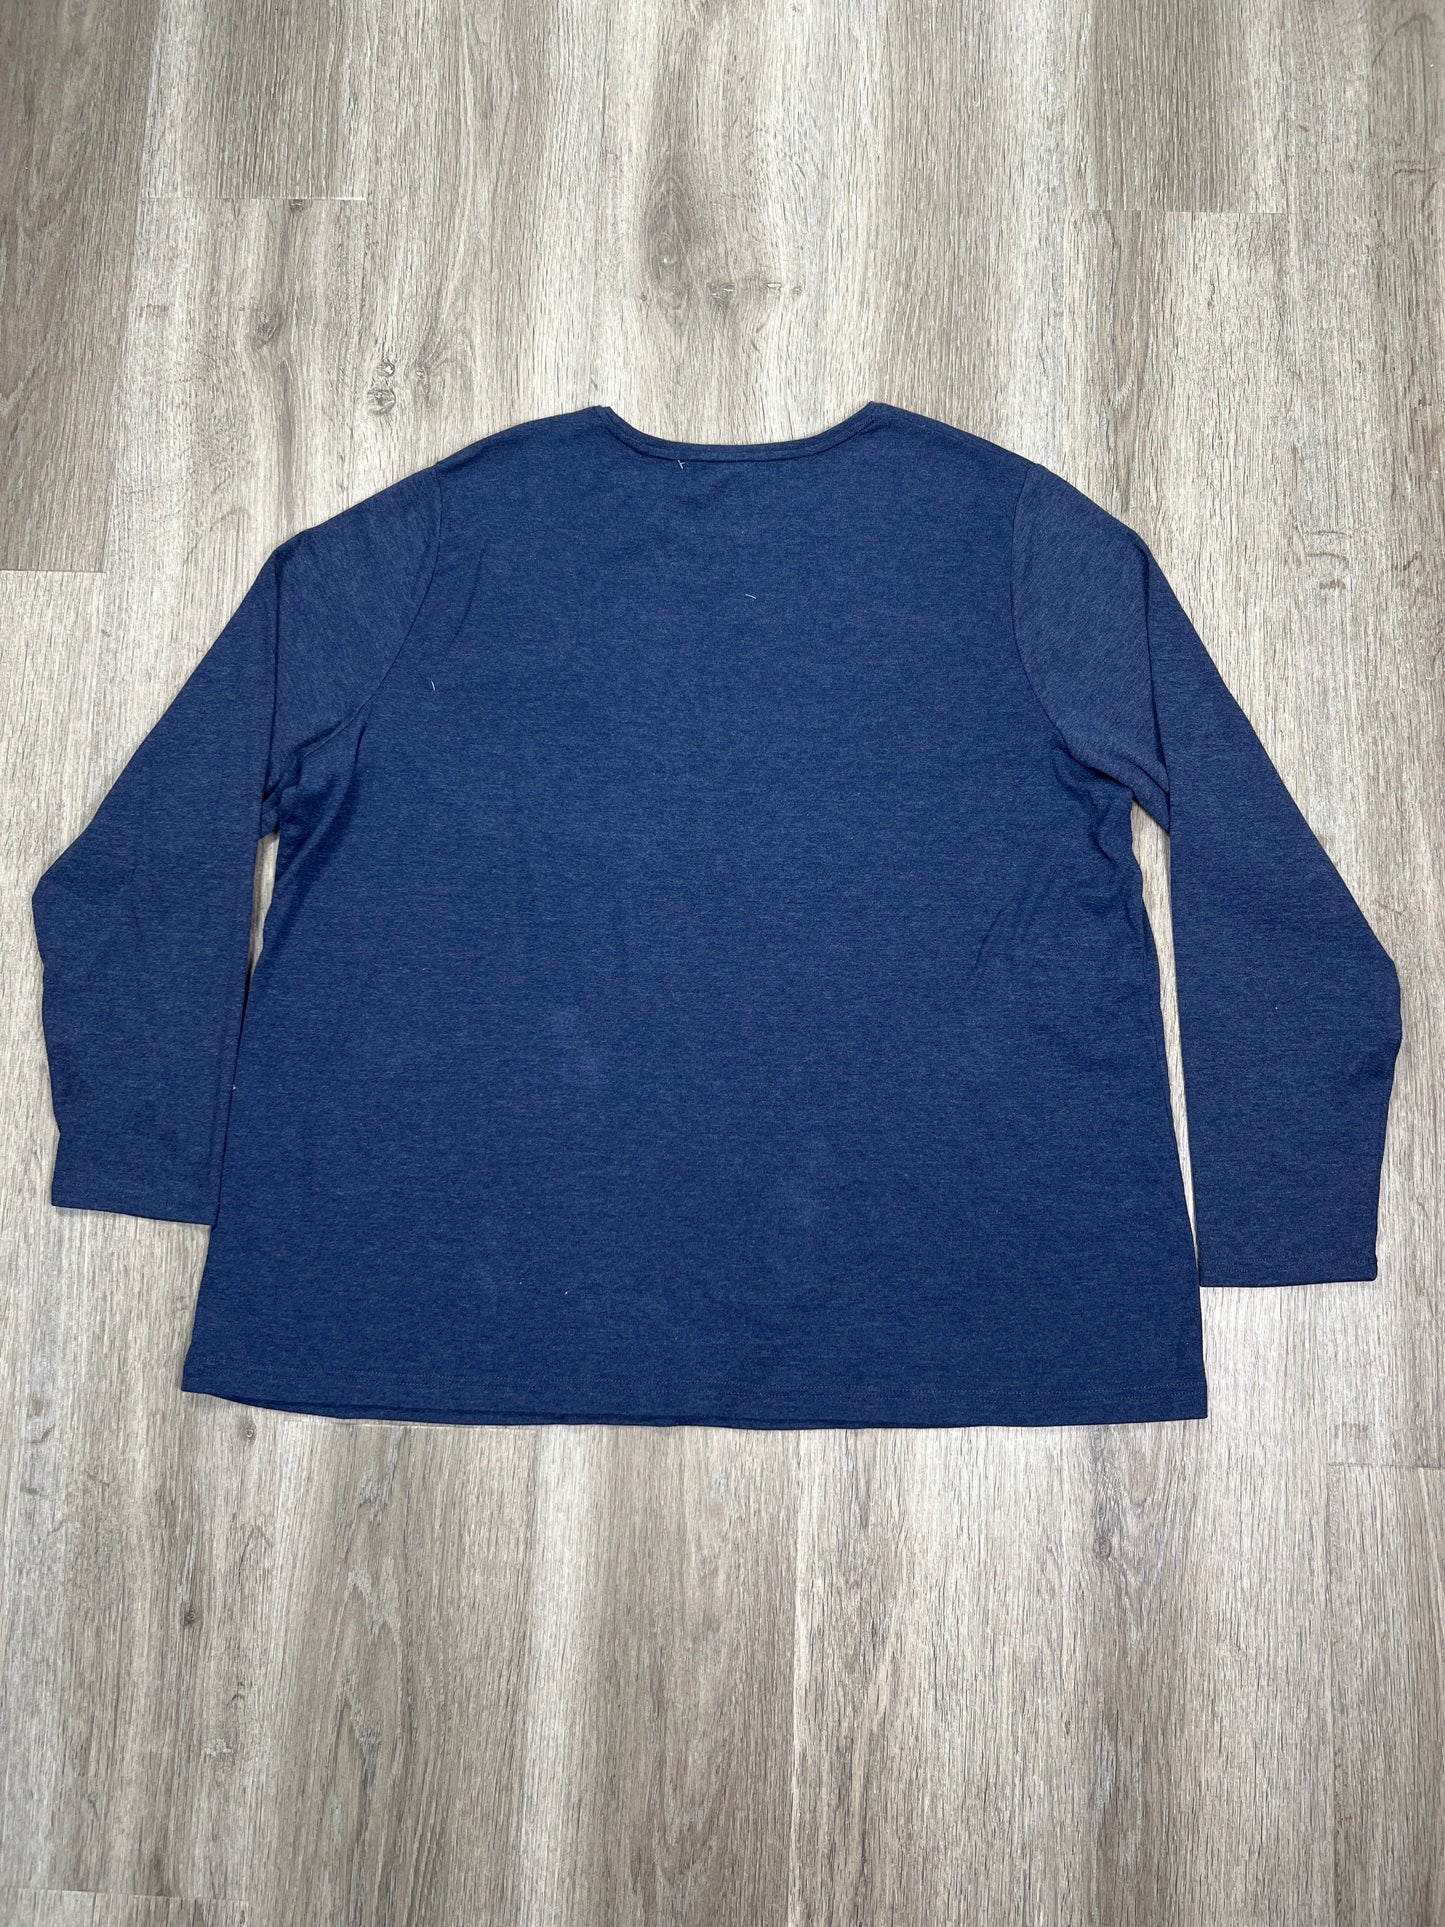 Top Long Sleeve Basic By Croft And Barrow  Size: 3x